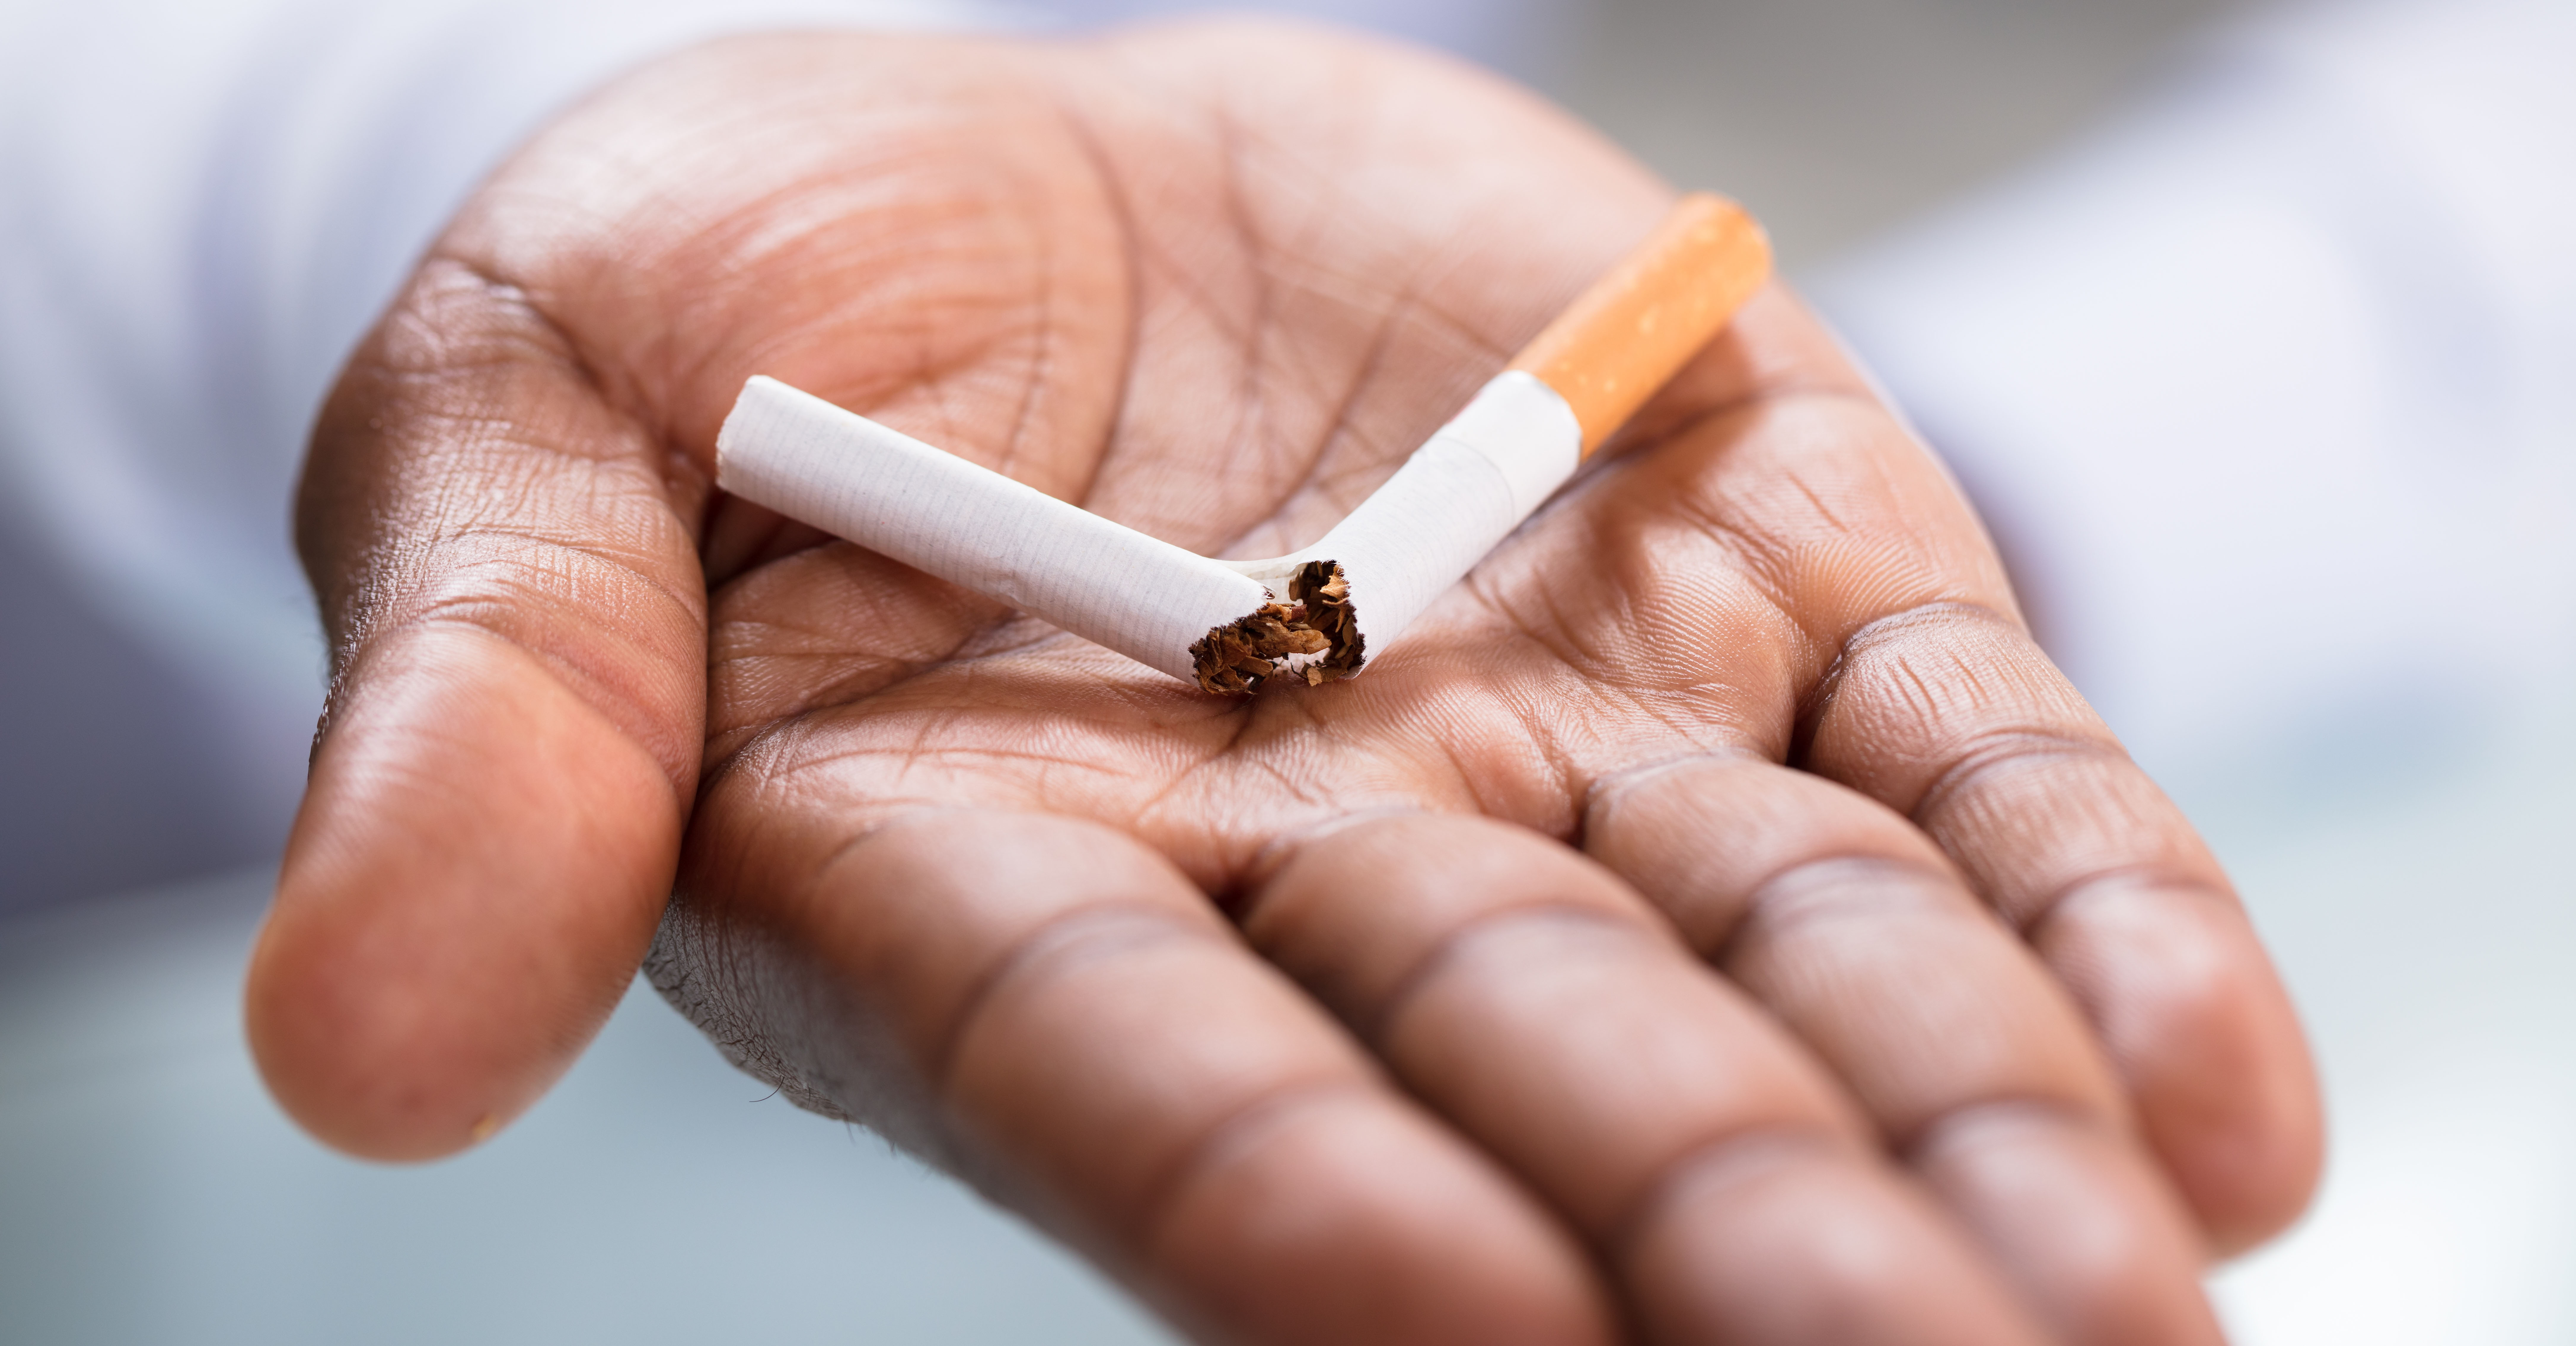 African Americans Bear the Brunt of Negative Health Outcomes of Menthol Cigarettes, Study Shows